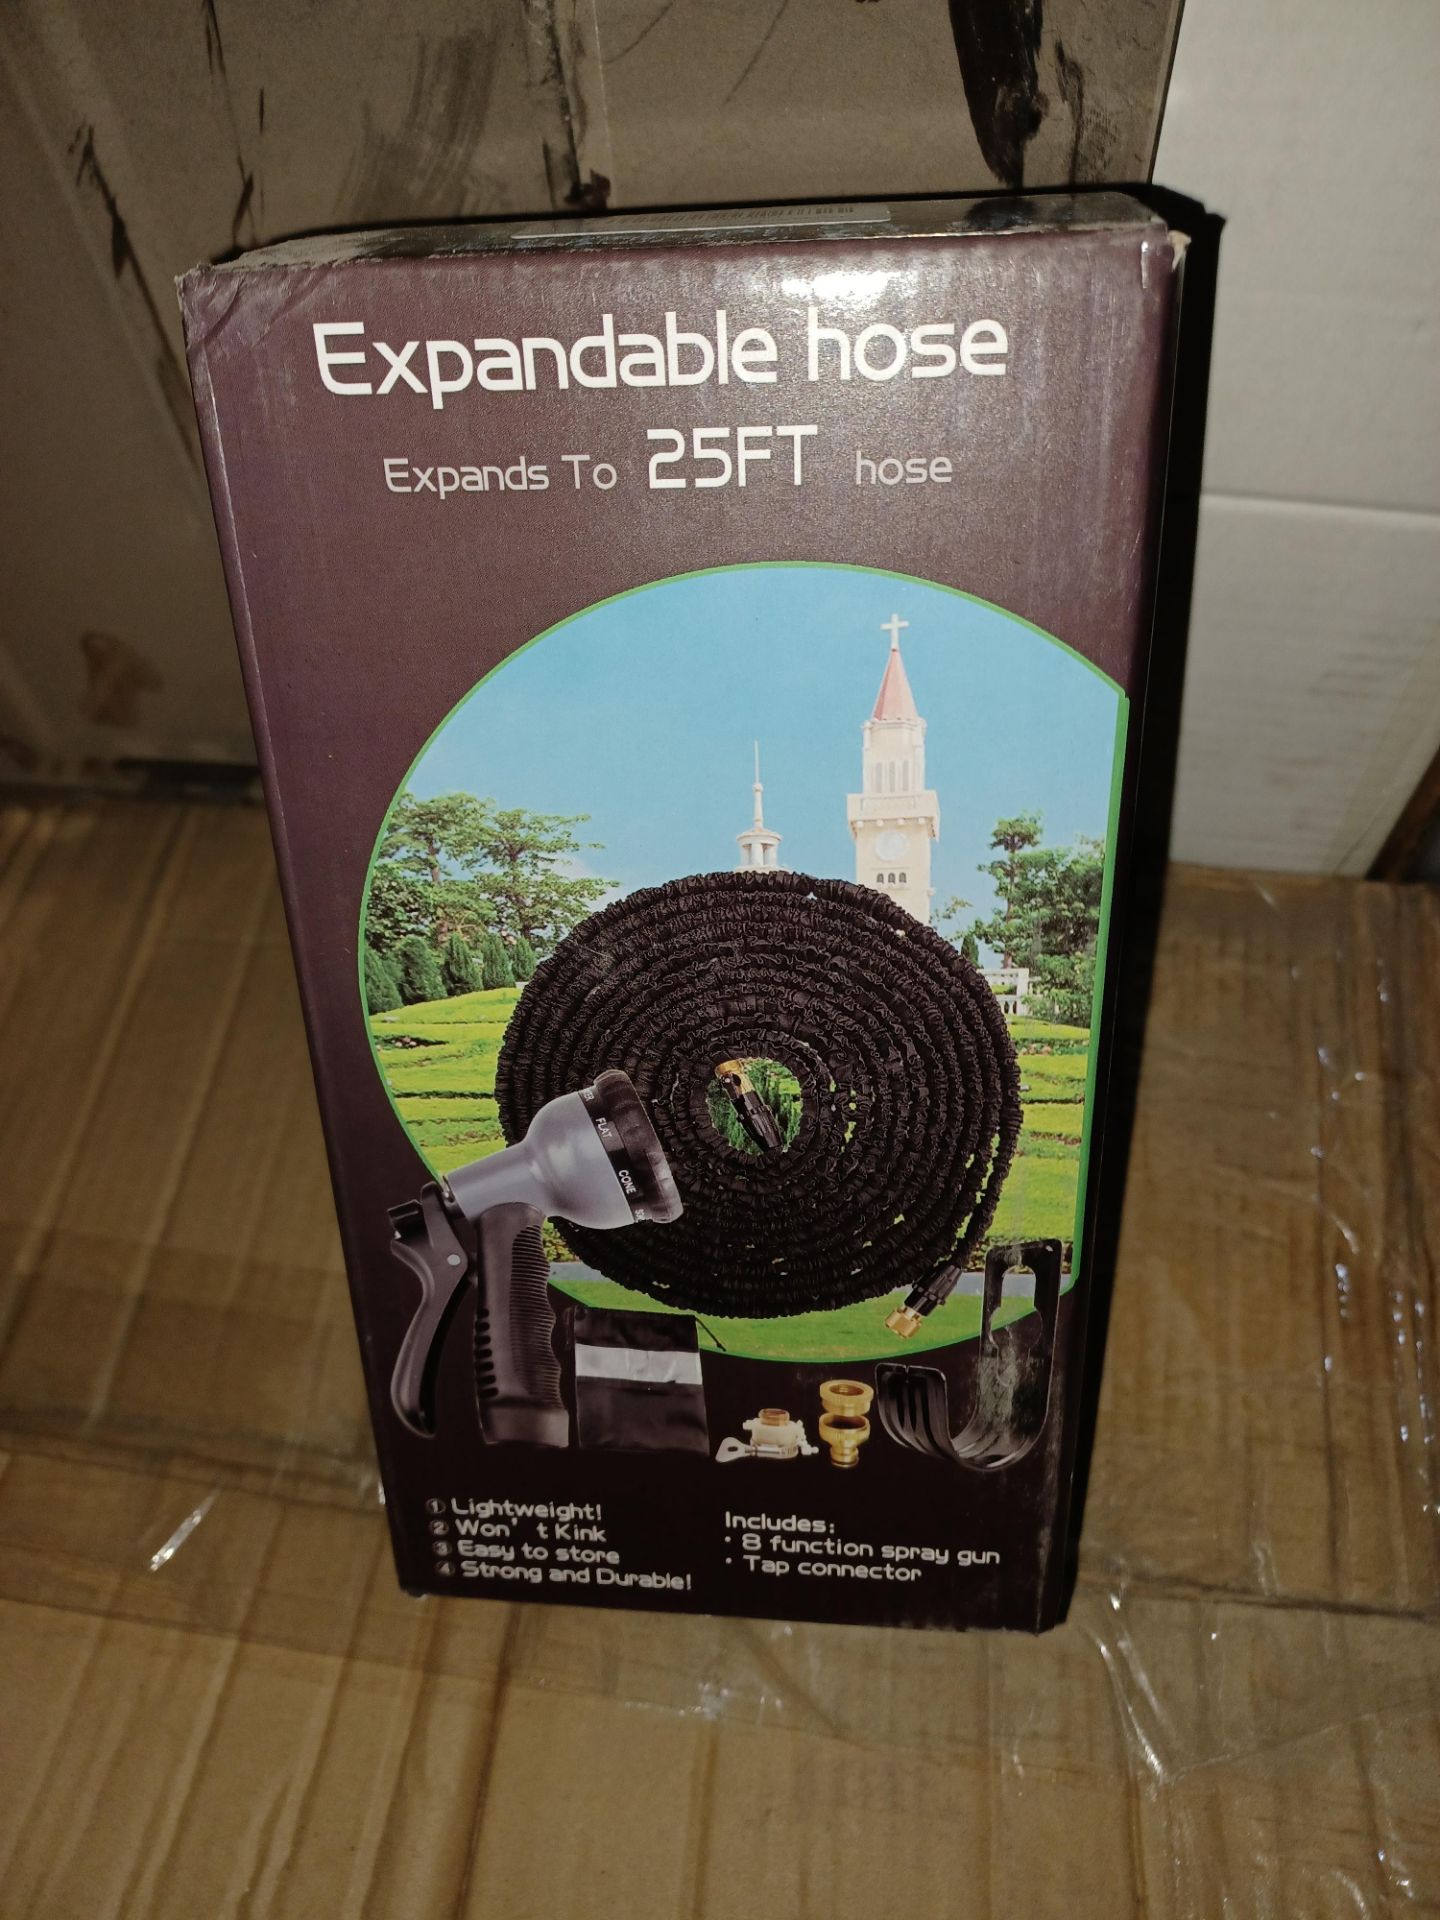 5 X NEW BOXED 25 FOOT EXPANDABLE HOSE SETS. INCLUDES TAP CONNECTOR, 25 FOOT HOSE & 8 FUNCTION